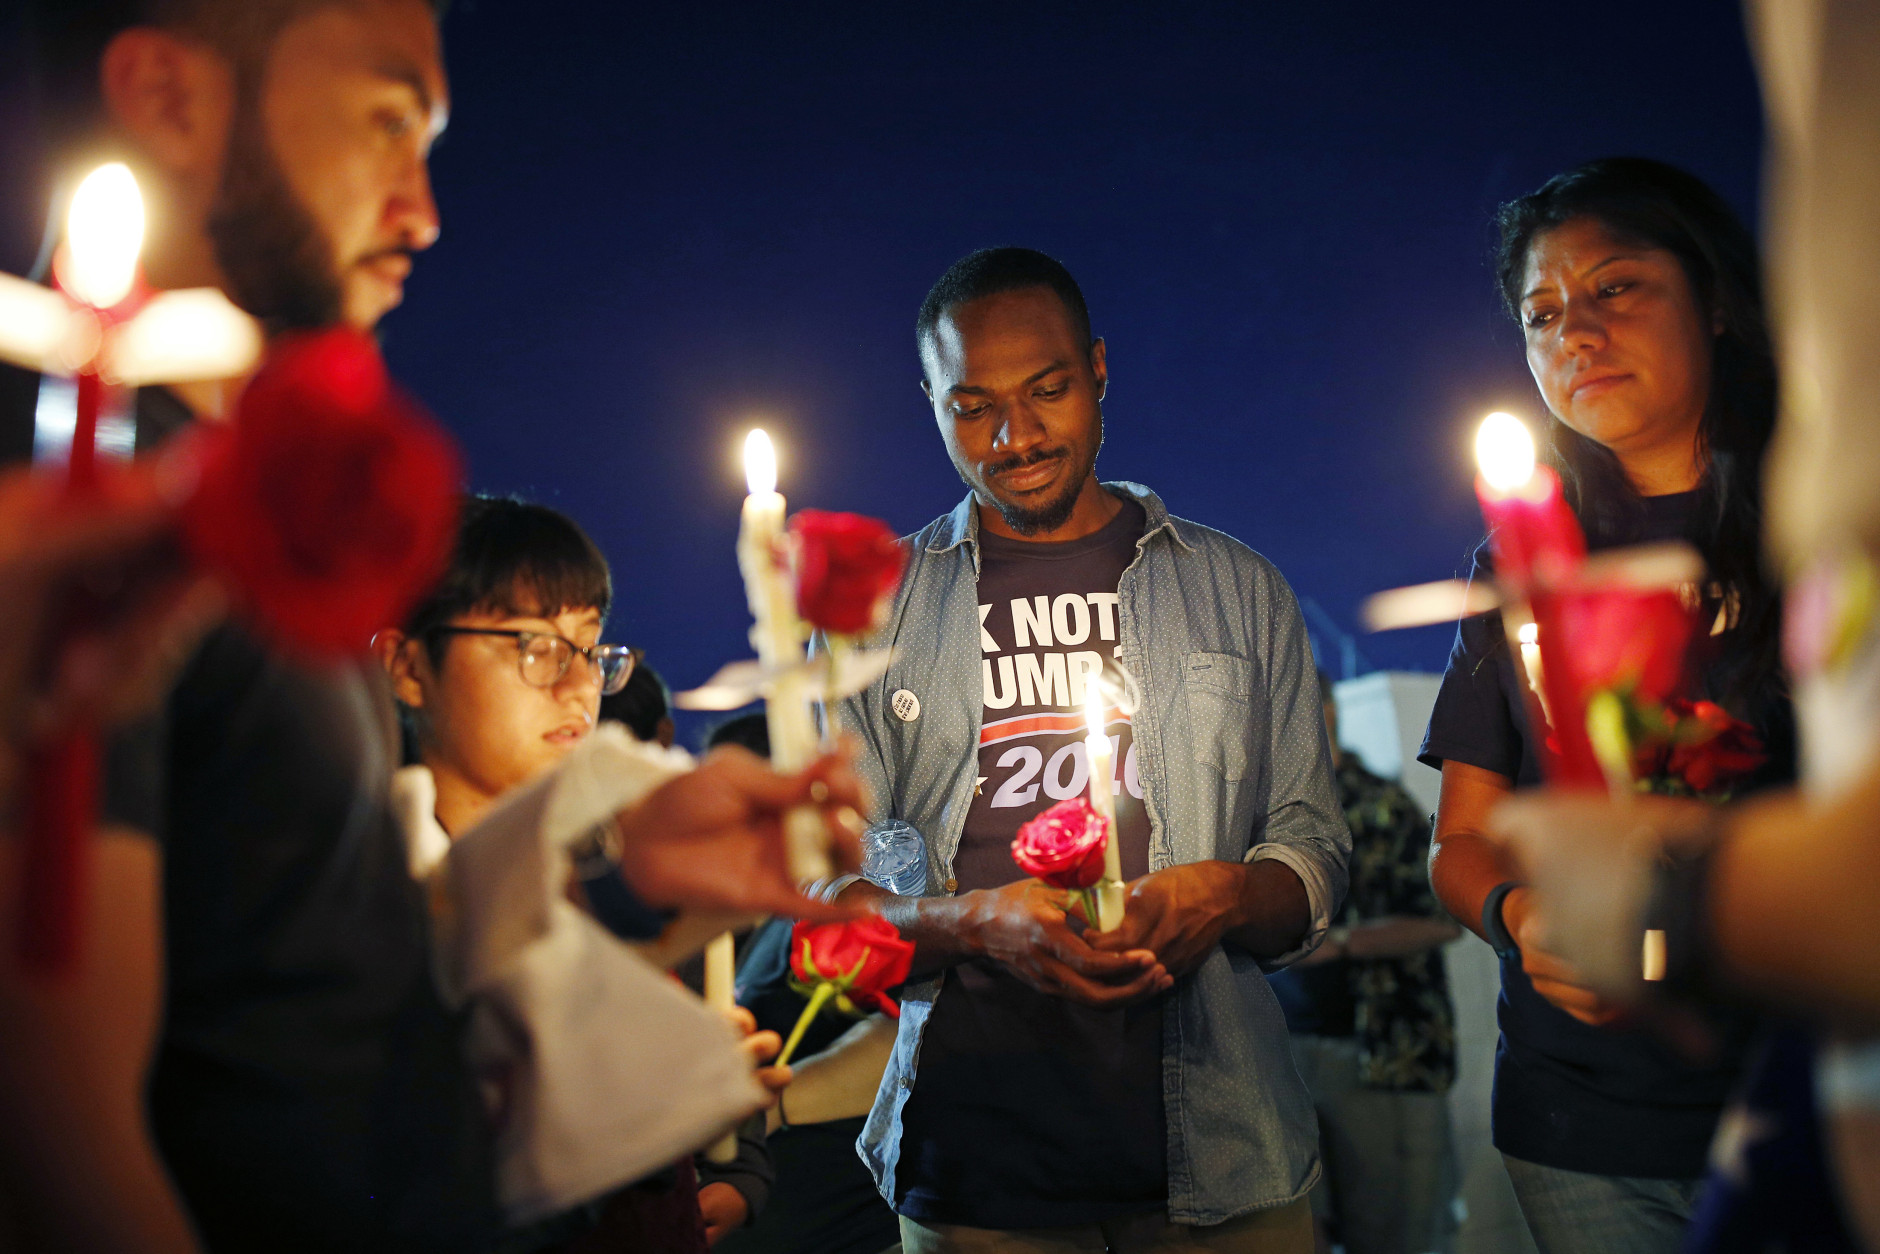 Maurice Forbes, center, holds a candle with others during a vigil at The Center, a community center for the LGBT community, Sunday, June 12, 2016, in Las Vegas. The vigil was for the victims of the Pulse nightclub shooting in Orlando. (AP Photo/John Locher)